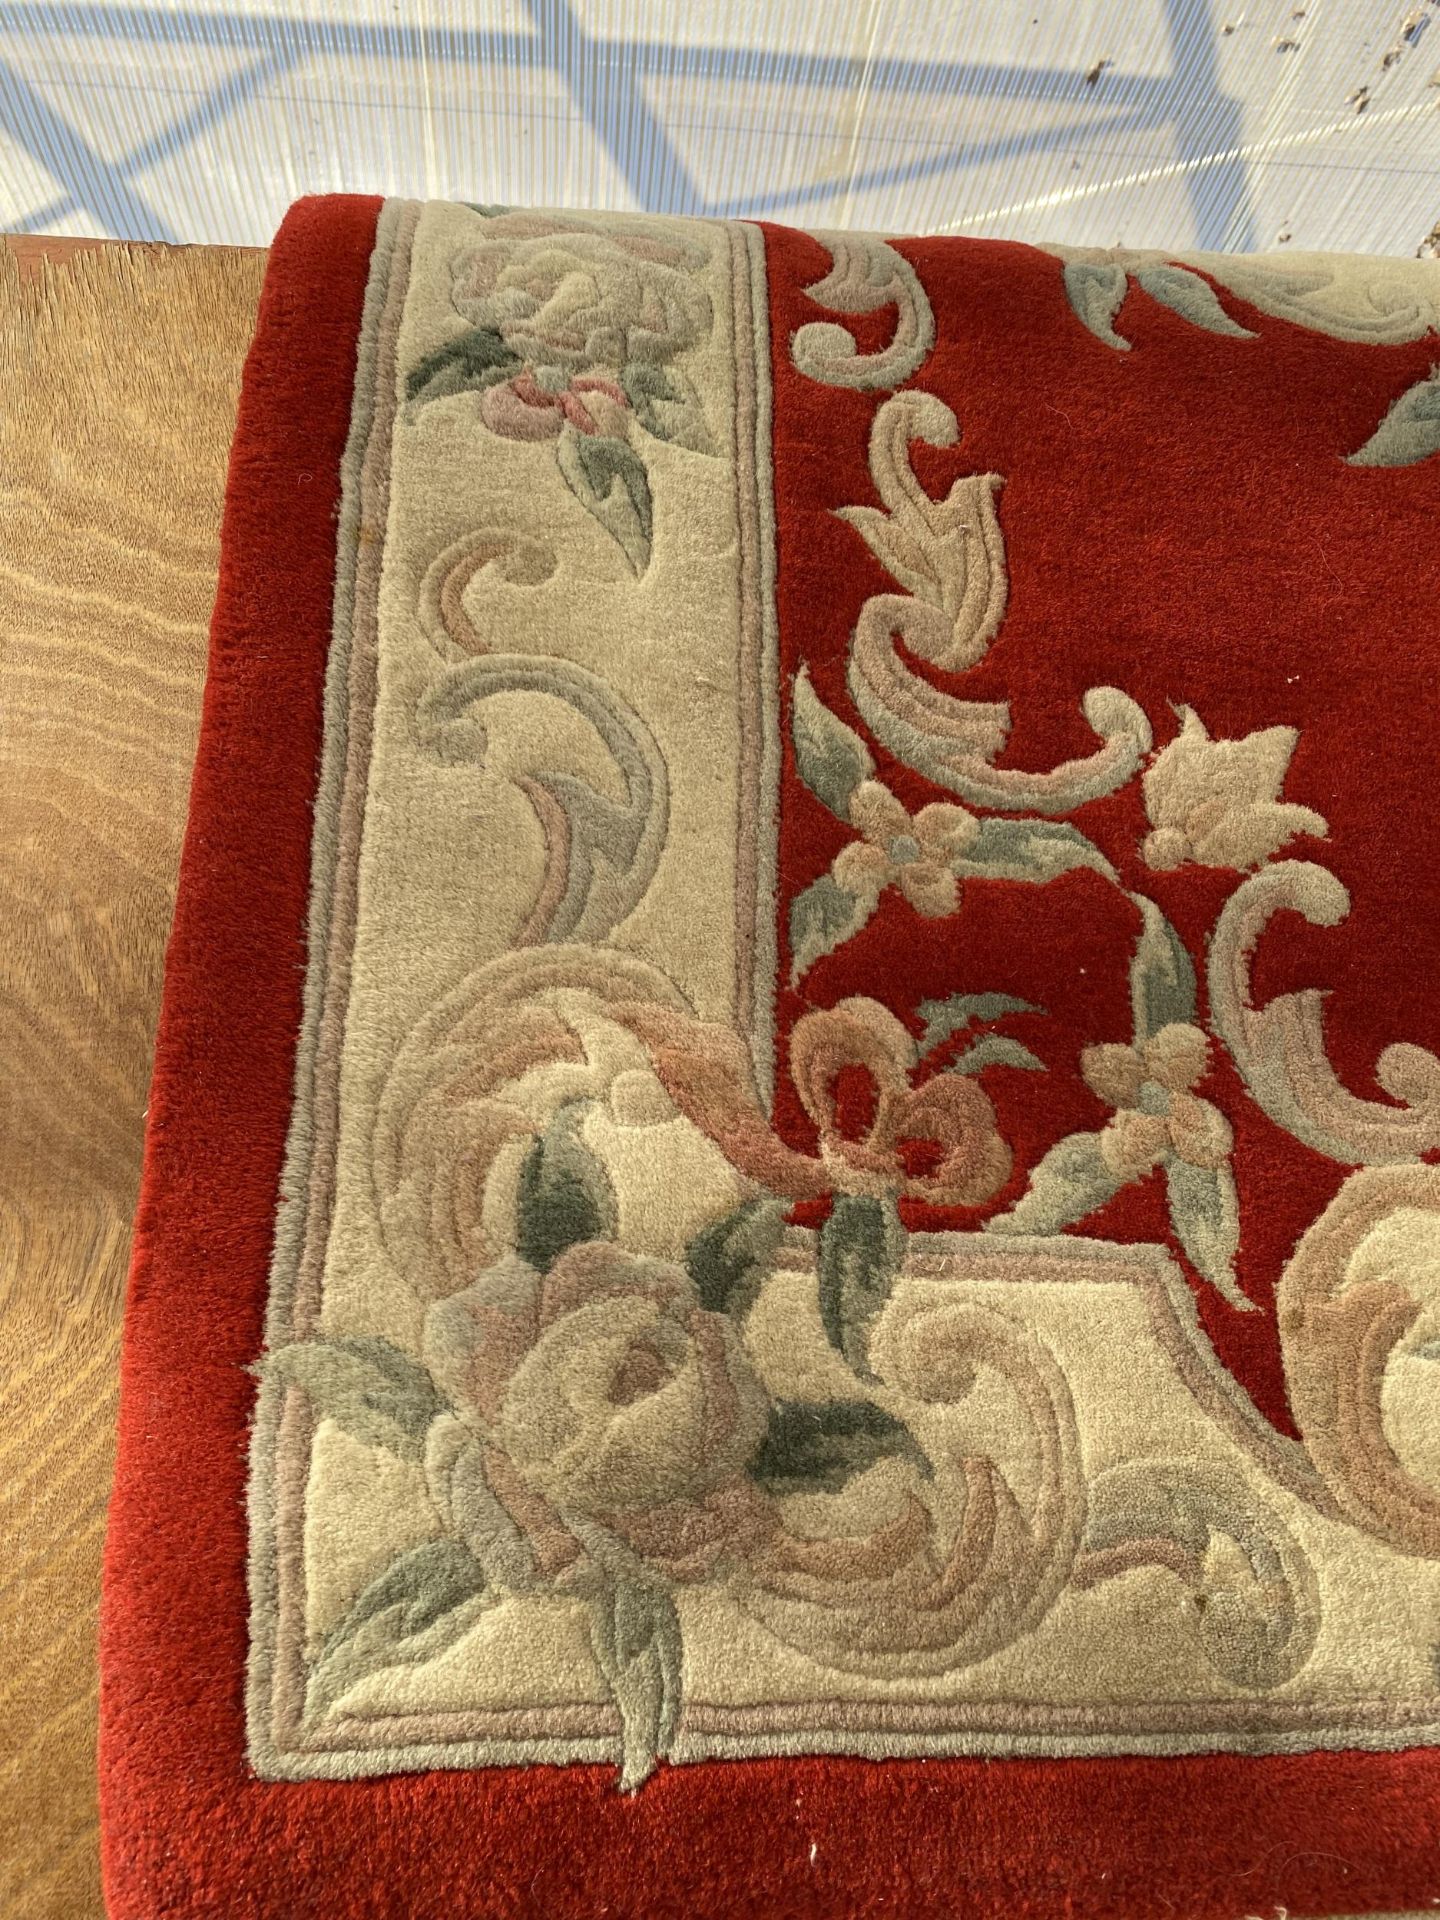 A RED AND CREAM PATTERNED FRINGED RUG - Image 3 of 3